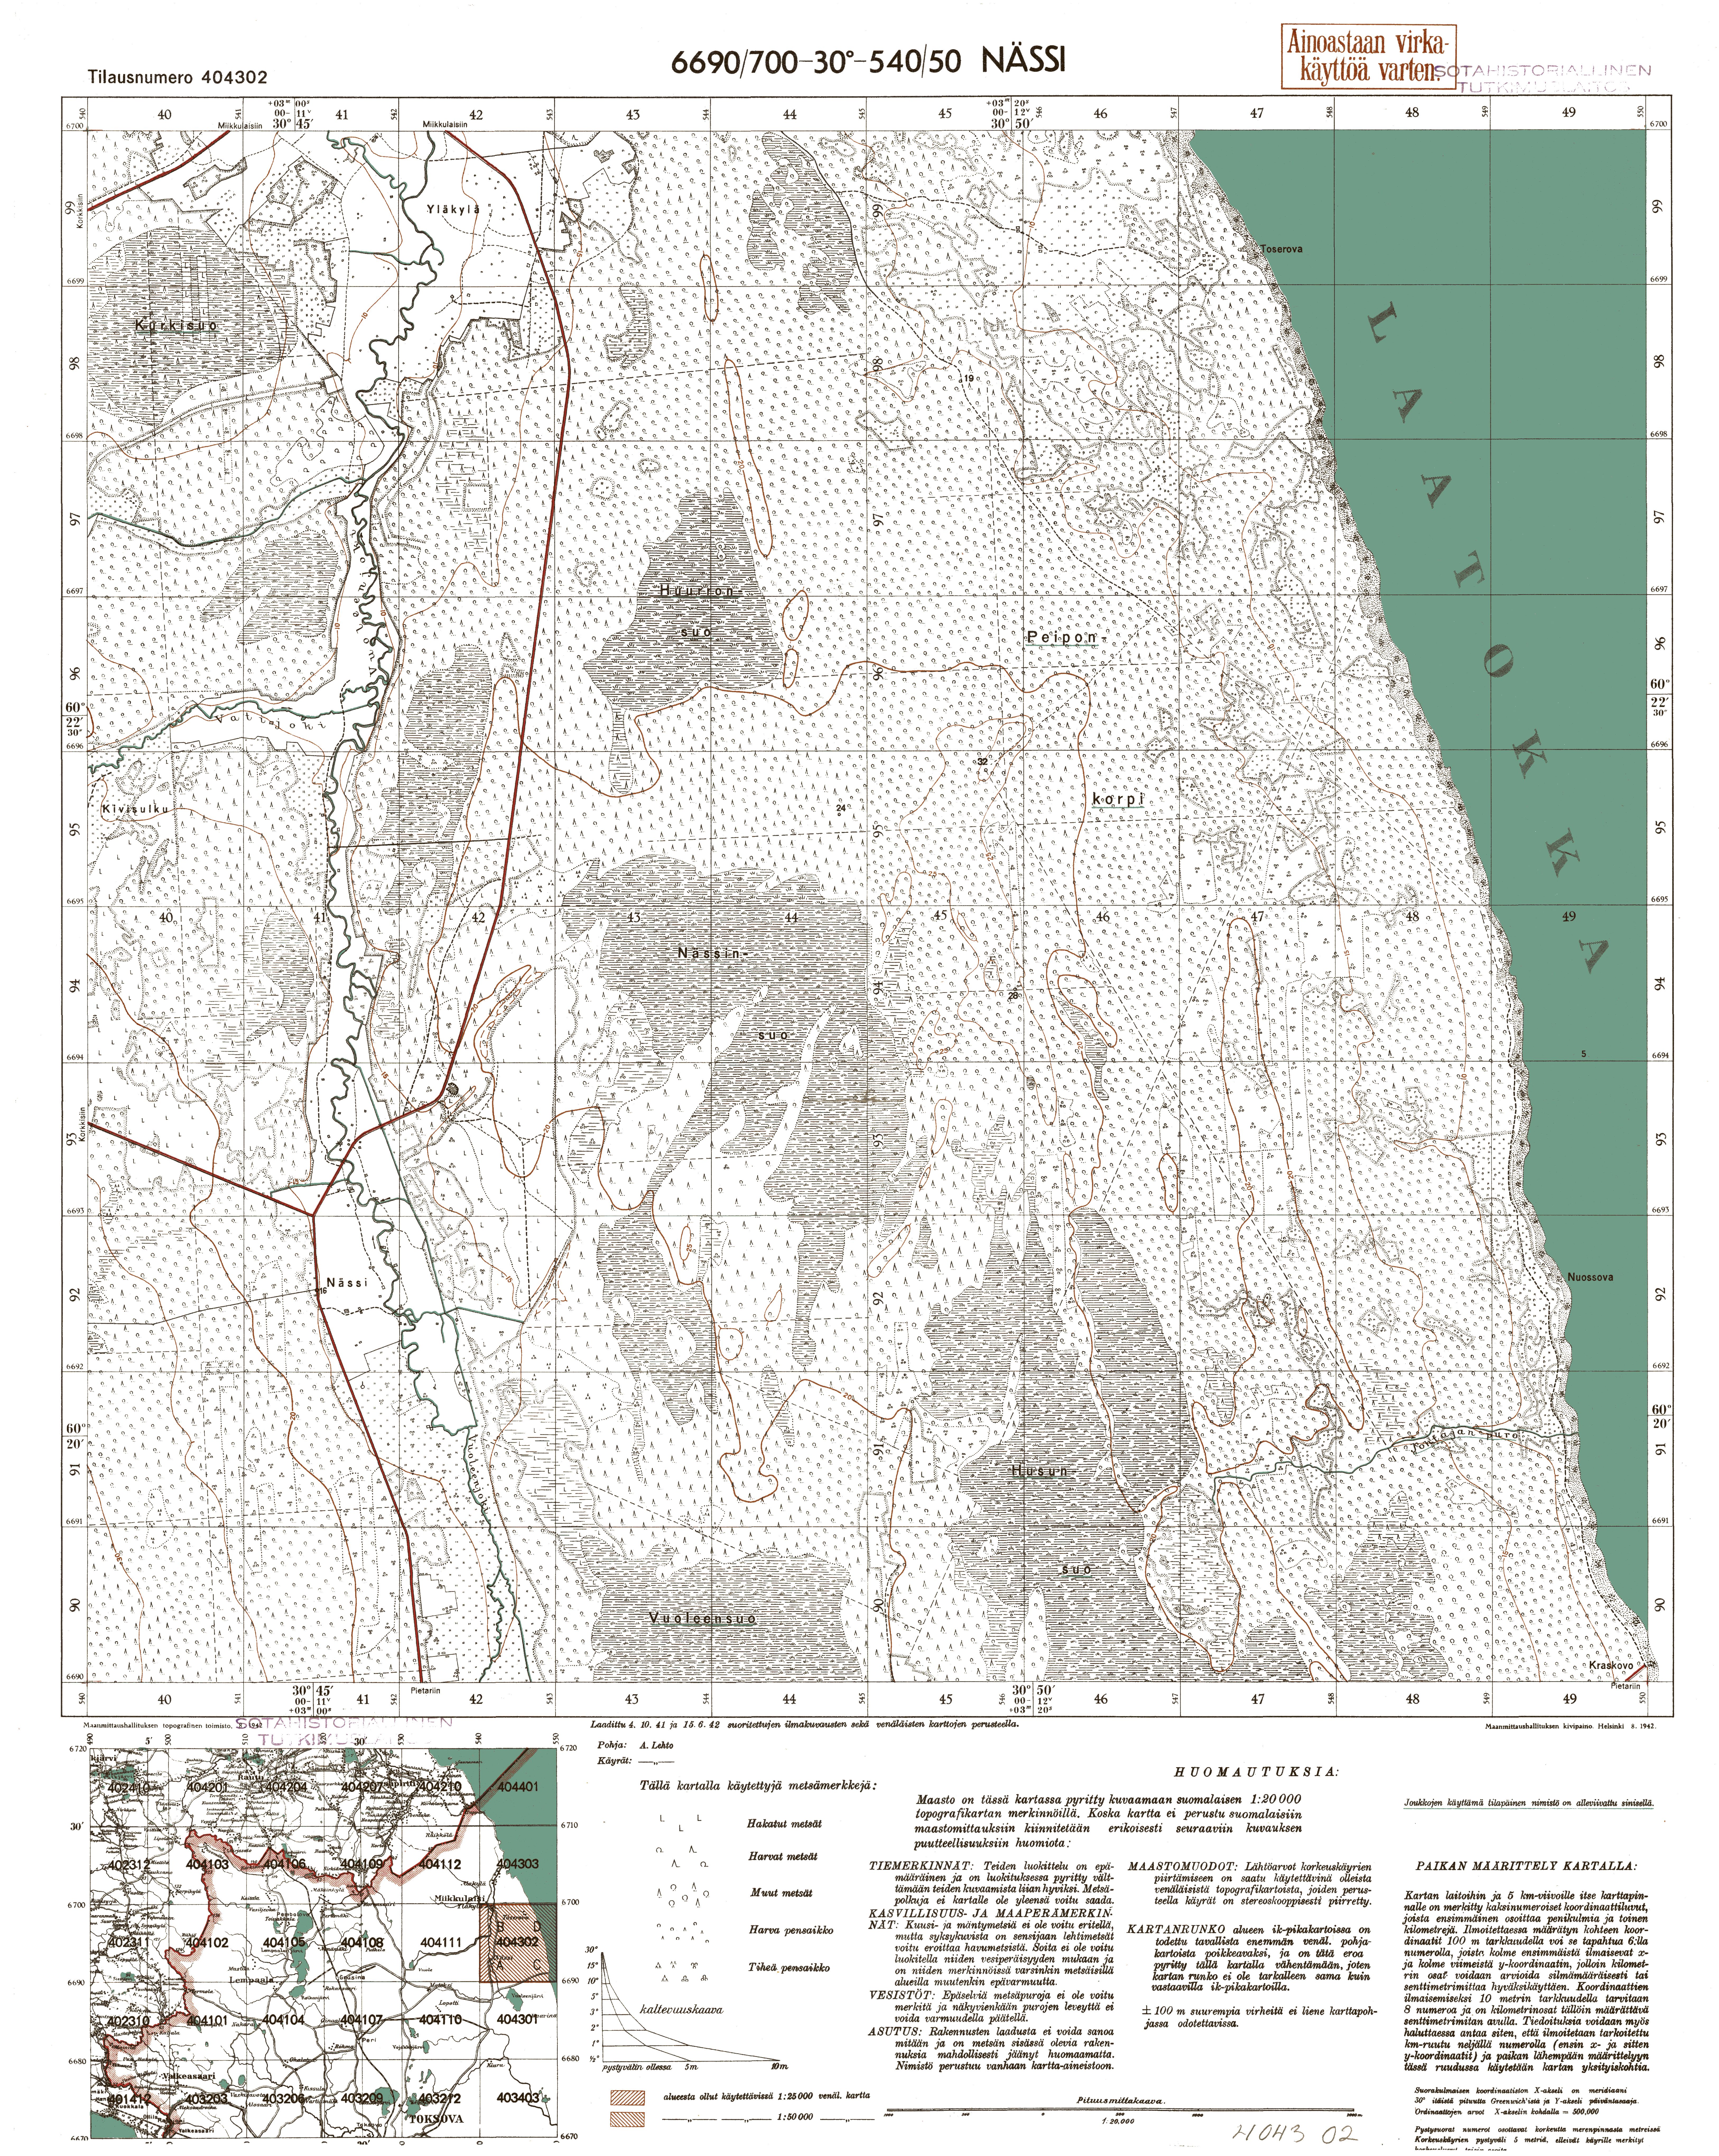 Njasino. Nässi. Topografikartta 404302. Topographic map from 1937. Use the zooming tool to explore in higher level of detail. Obtain as a quality print or high resolution image